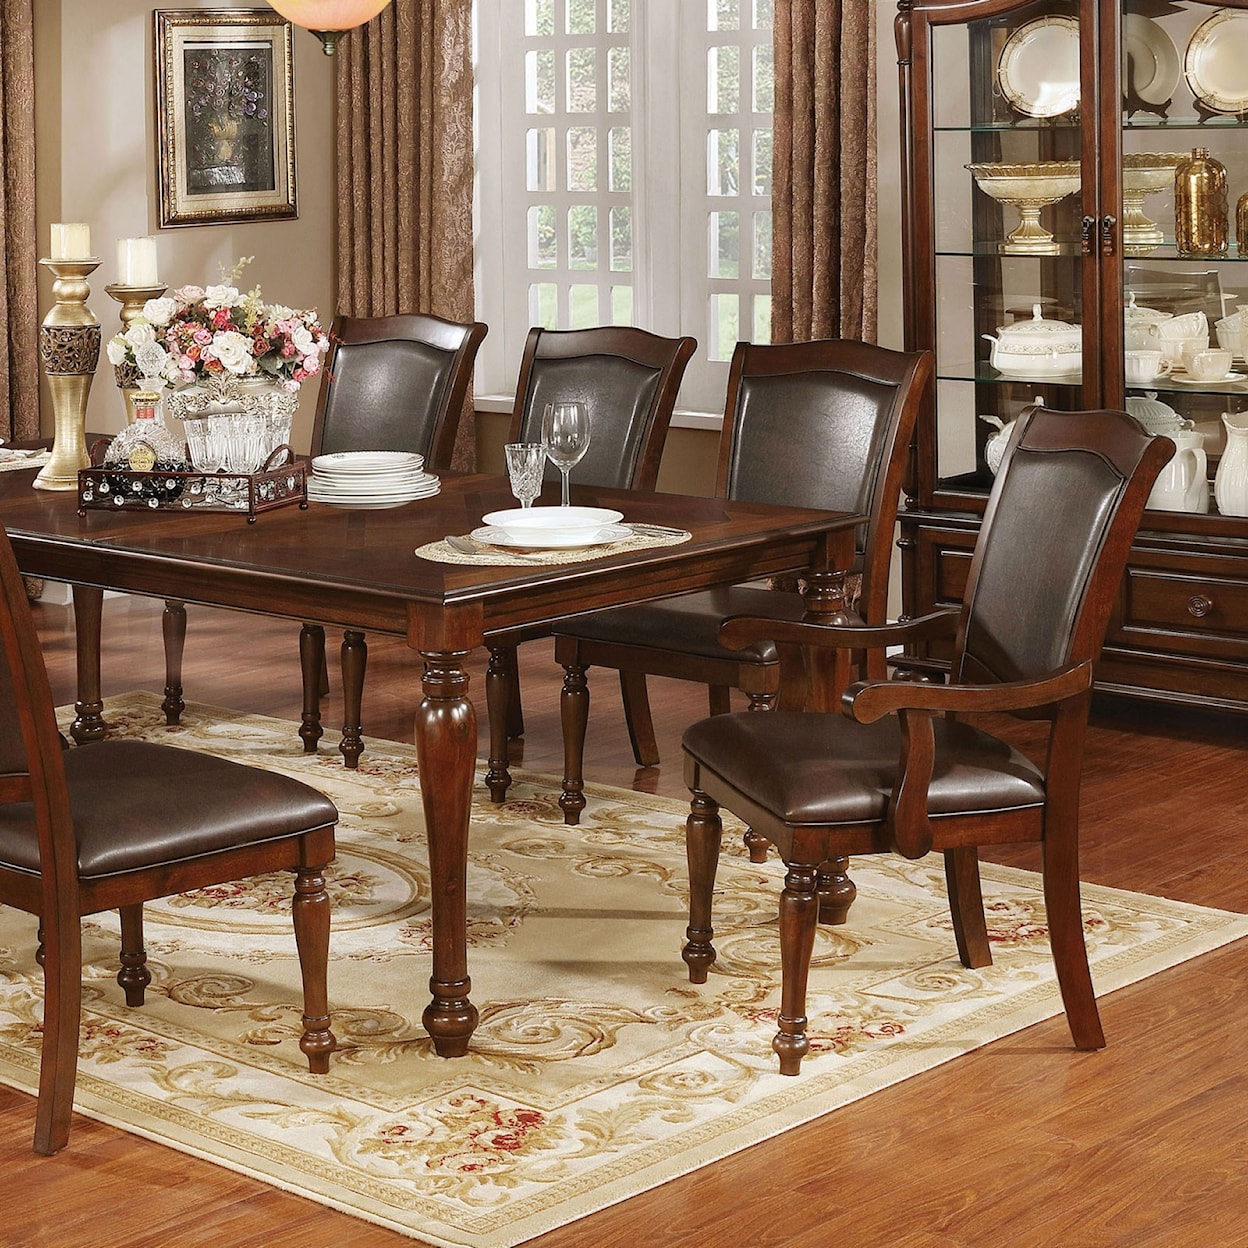 Furniture of America Sylvana Dining Table